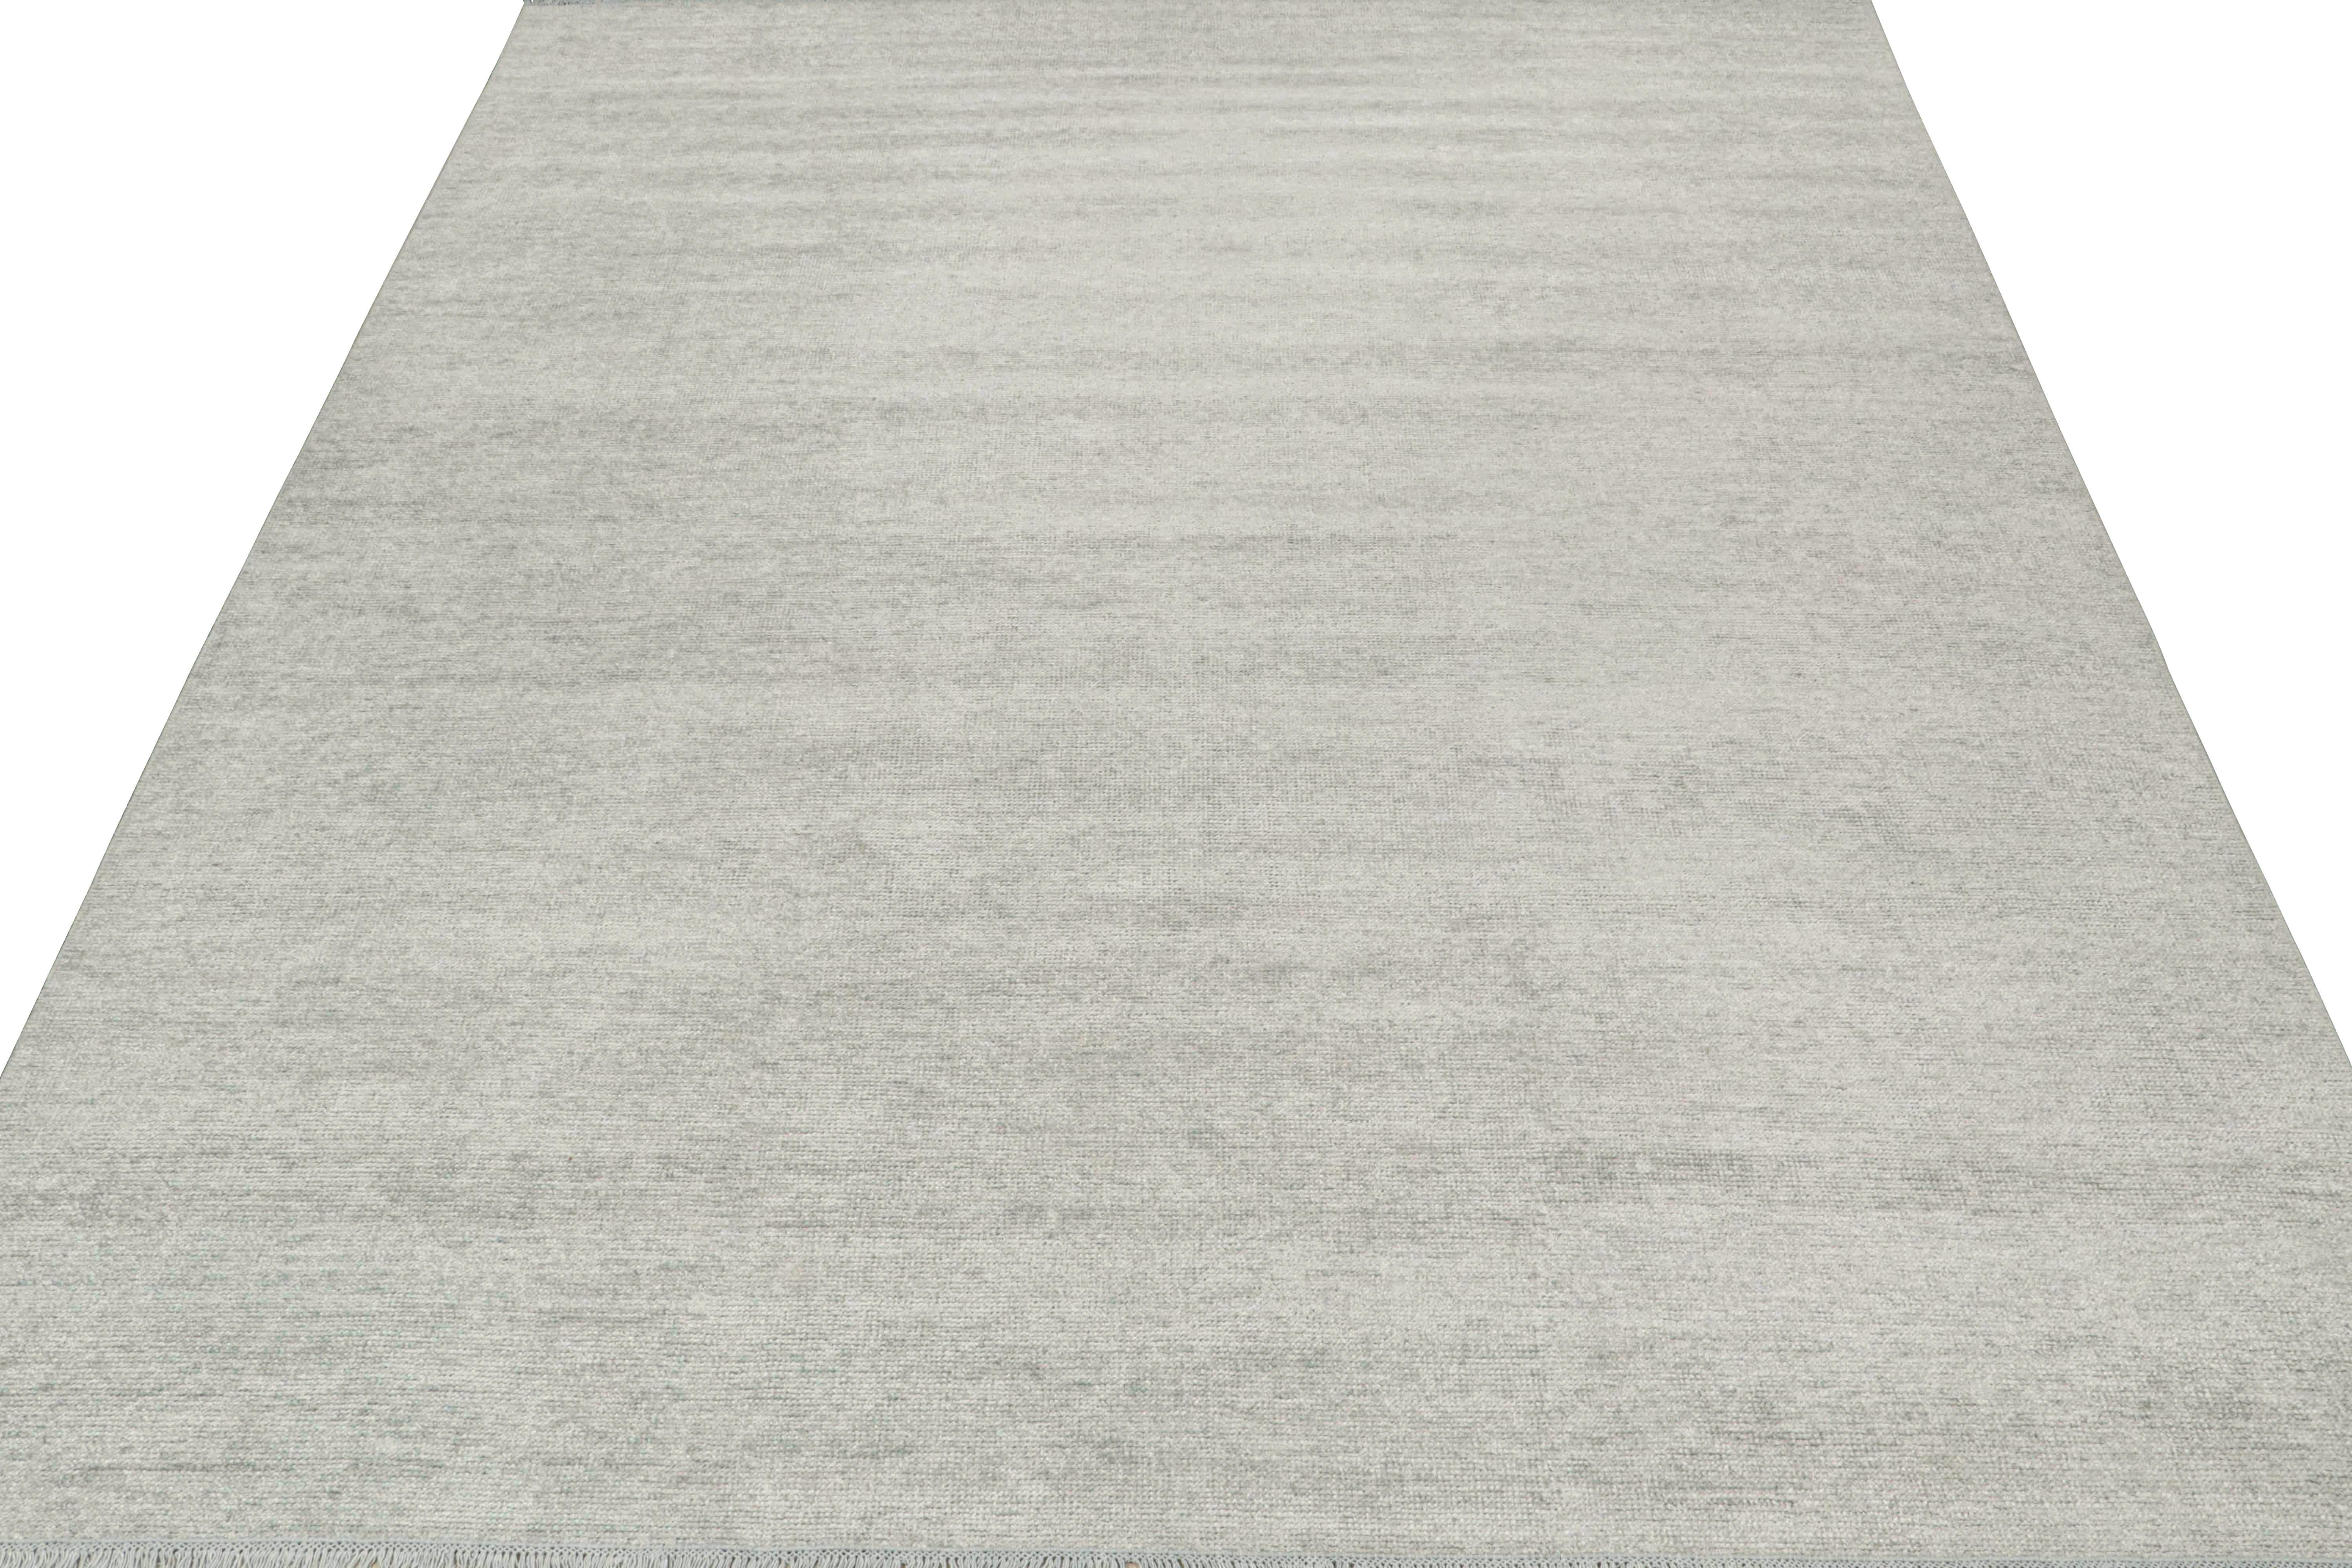 Indian Rug & Kilim’s Modern Rug in Solid Silver-Gray Tone-on-tone Striae For Sale